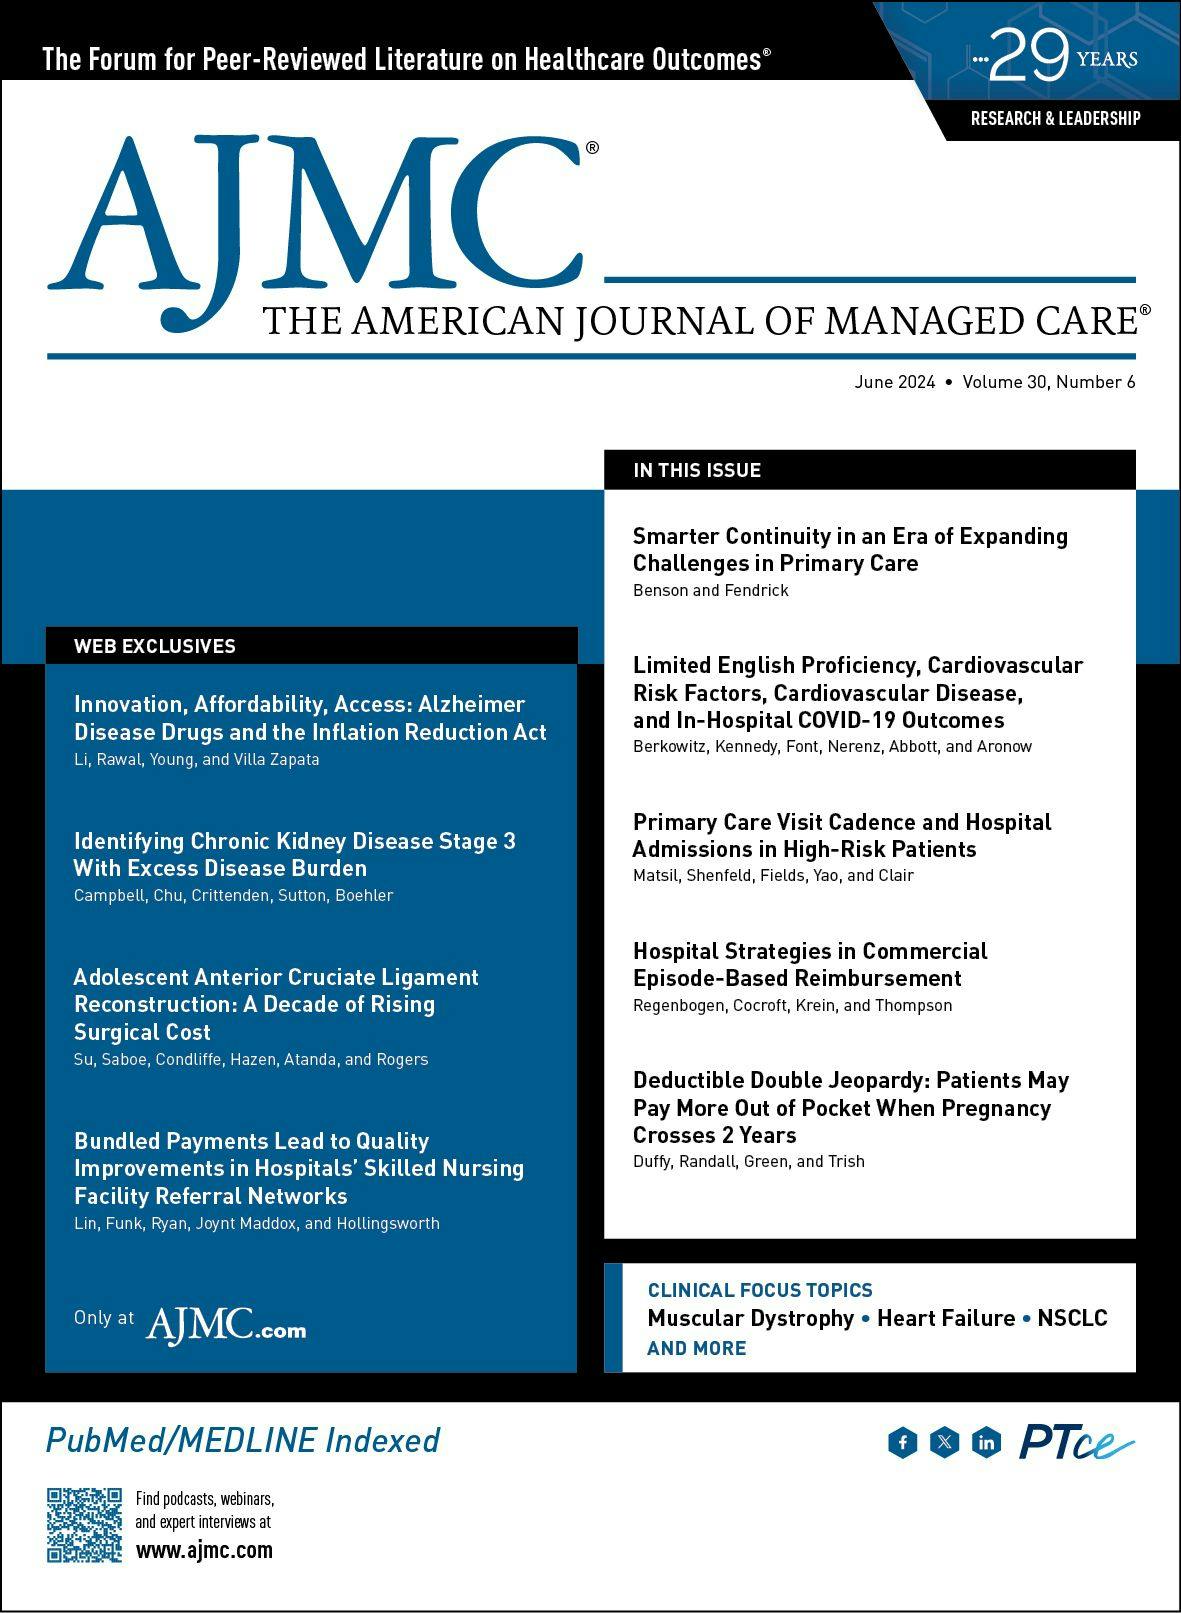 The June 2024 Issue of The American Journal of Managed Care